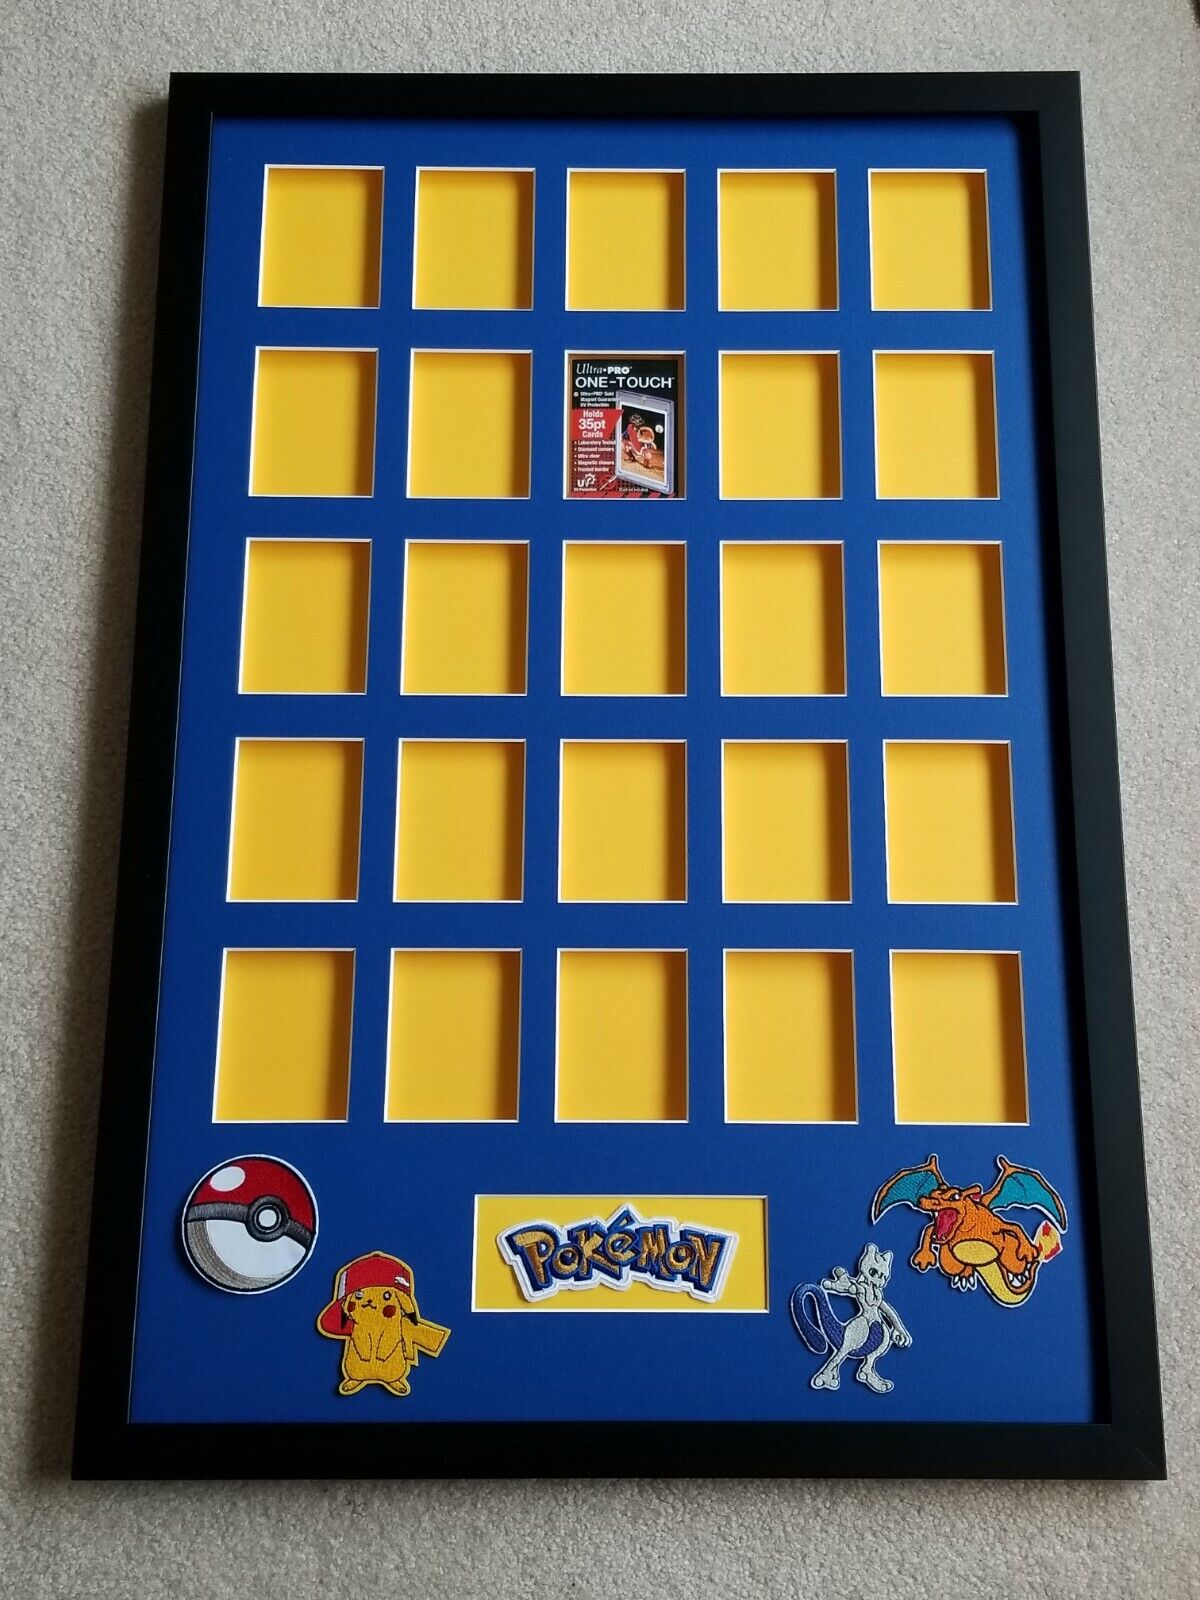 25 CARD POKEMON CARD DISPLAY. CAN BE CUSTOMIZED TO FIT ANY SIZE CASE!  QUALITY!!